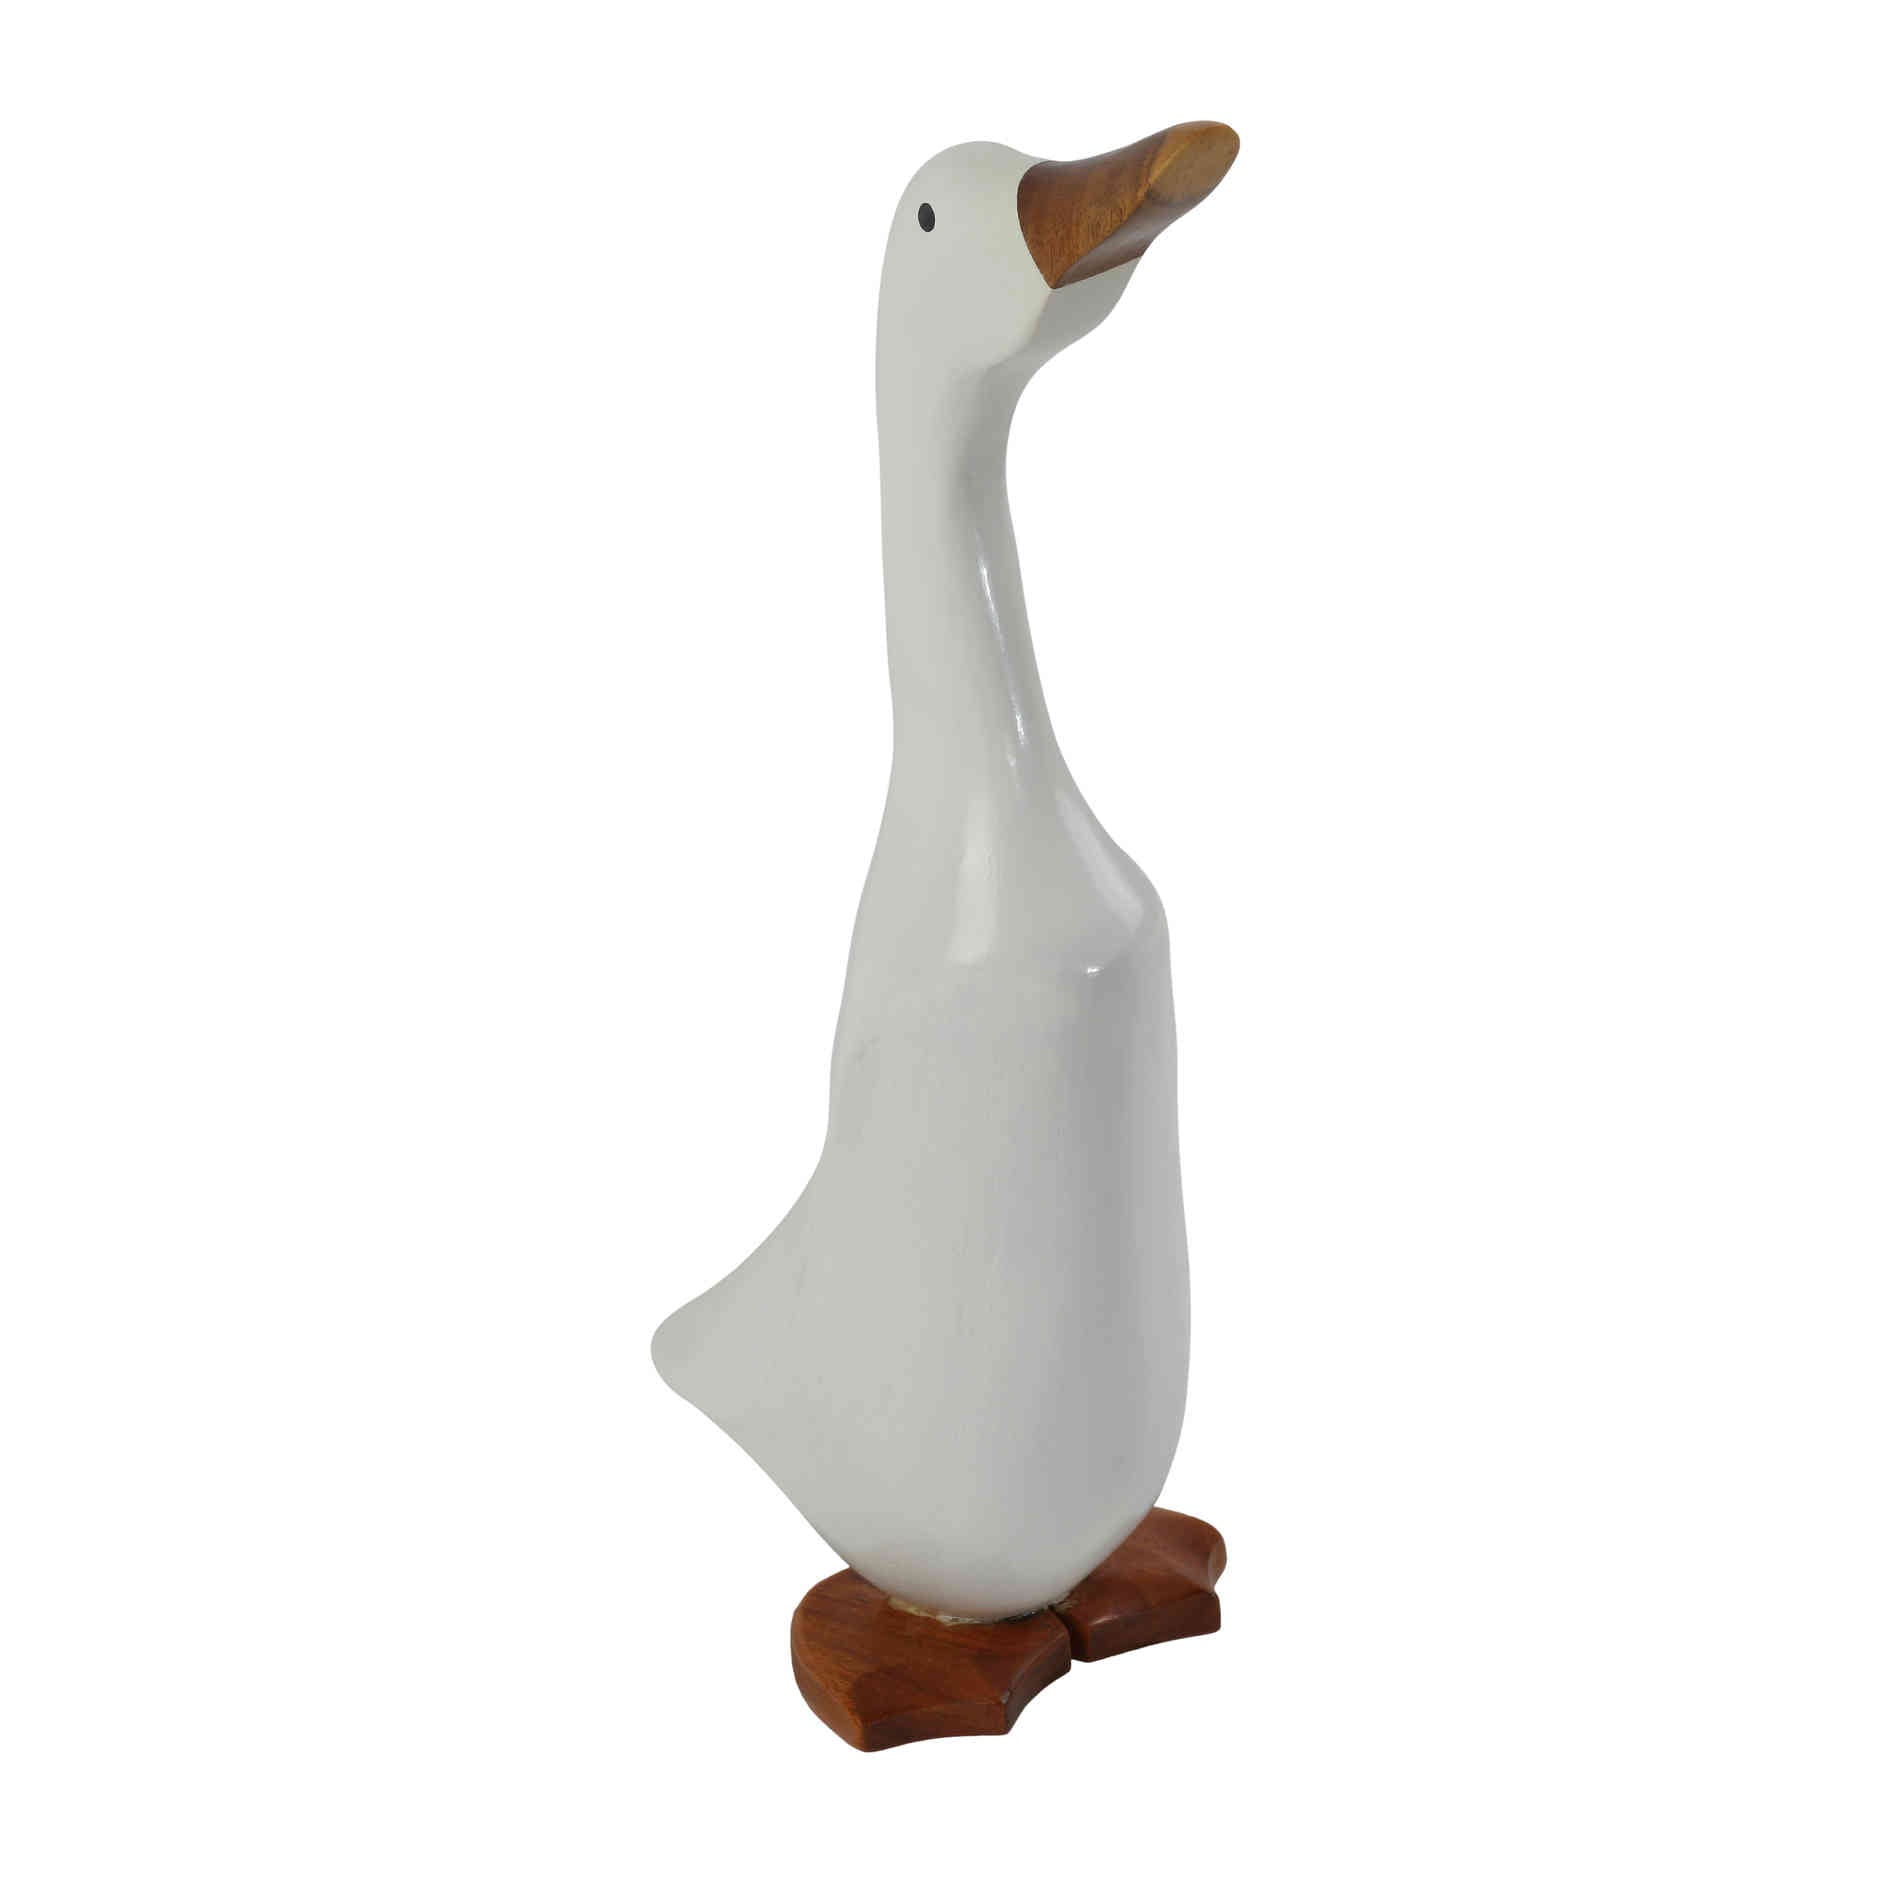 Bare Decor Albert the Duck, Hand Carved and Painted White, Bamboo Root Figurine